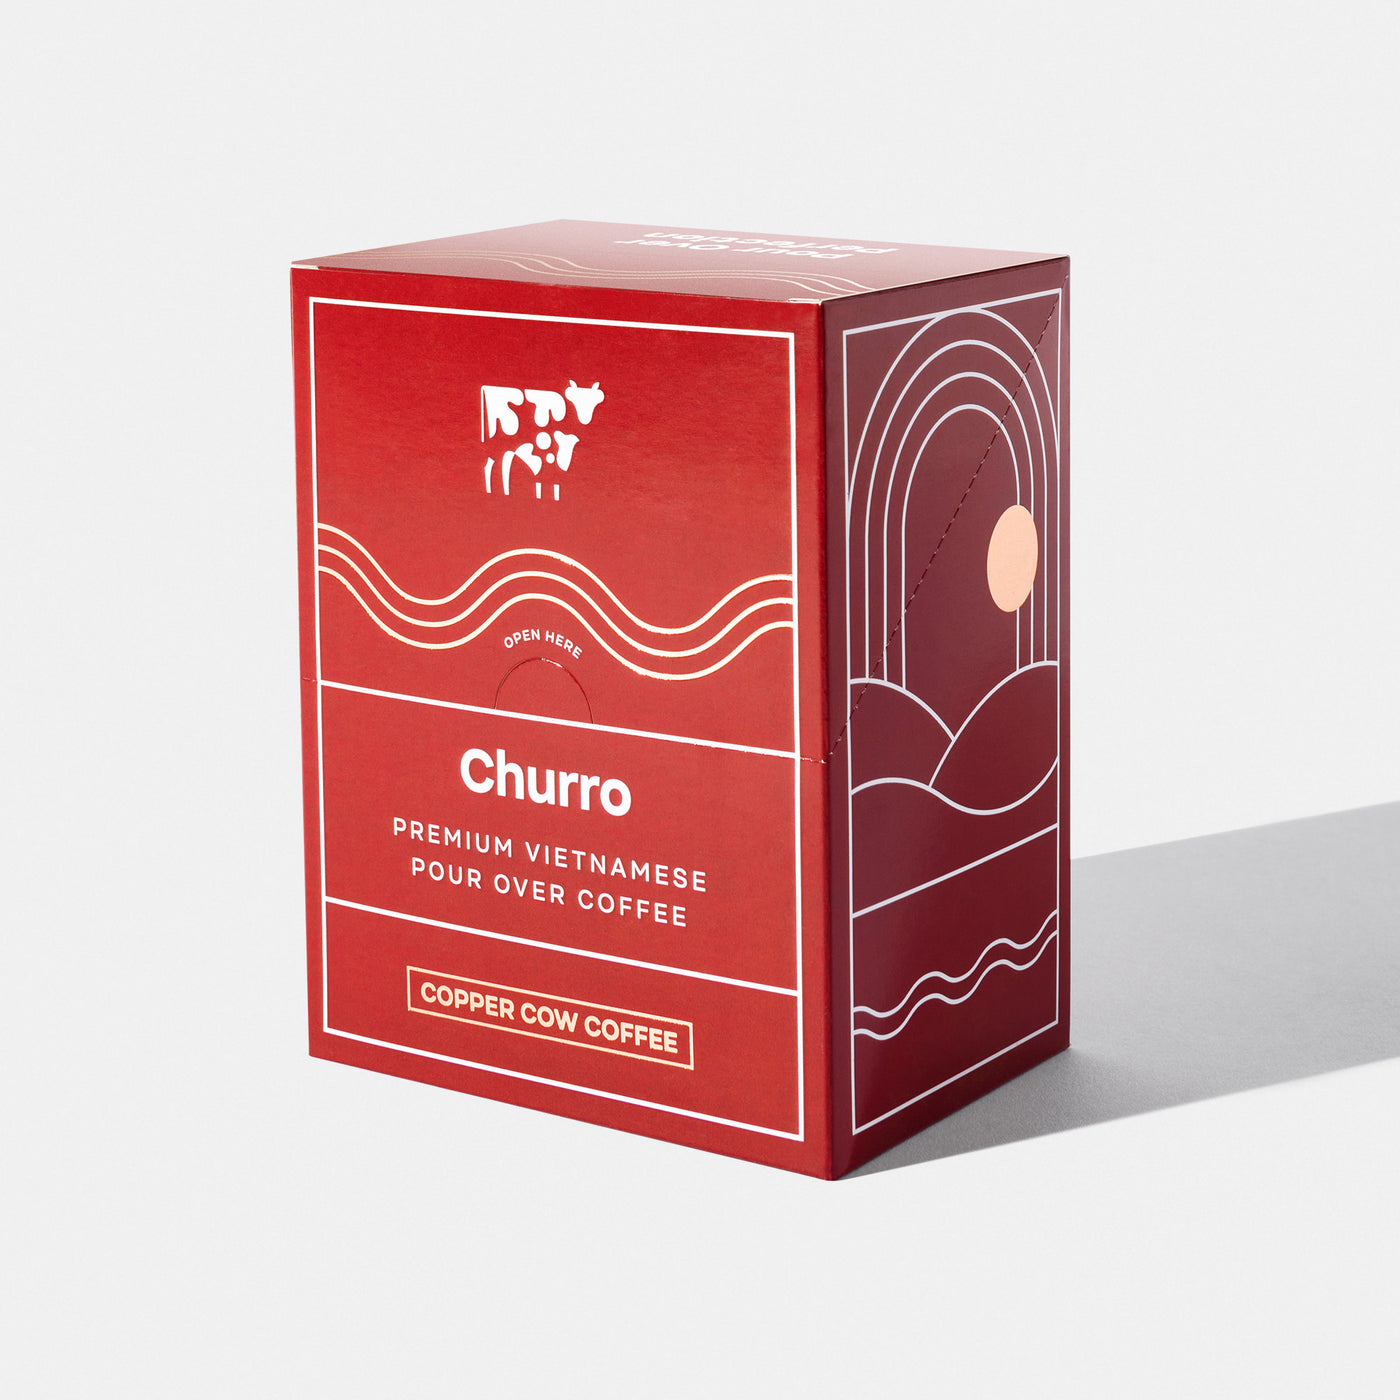 8-Pack of Churro Vietnamese Coffee single-serve pour over pouches in closed box.